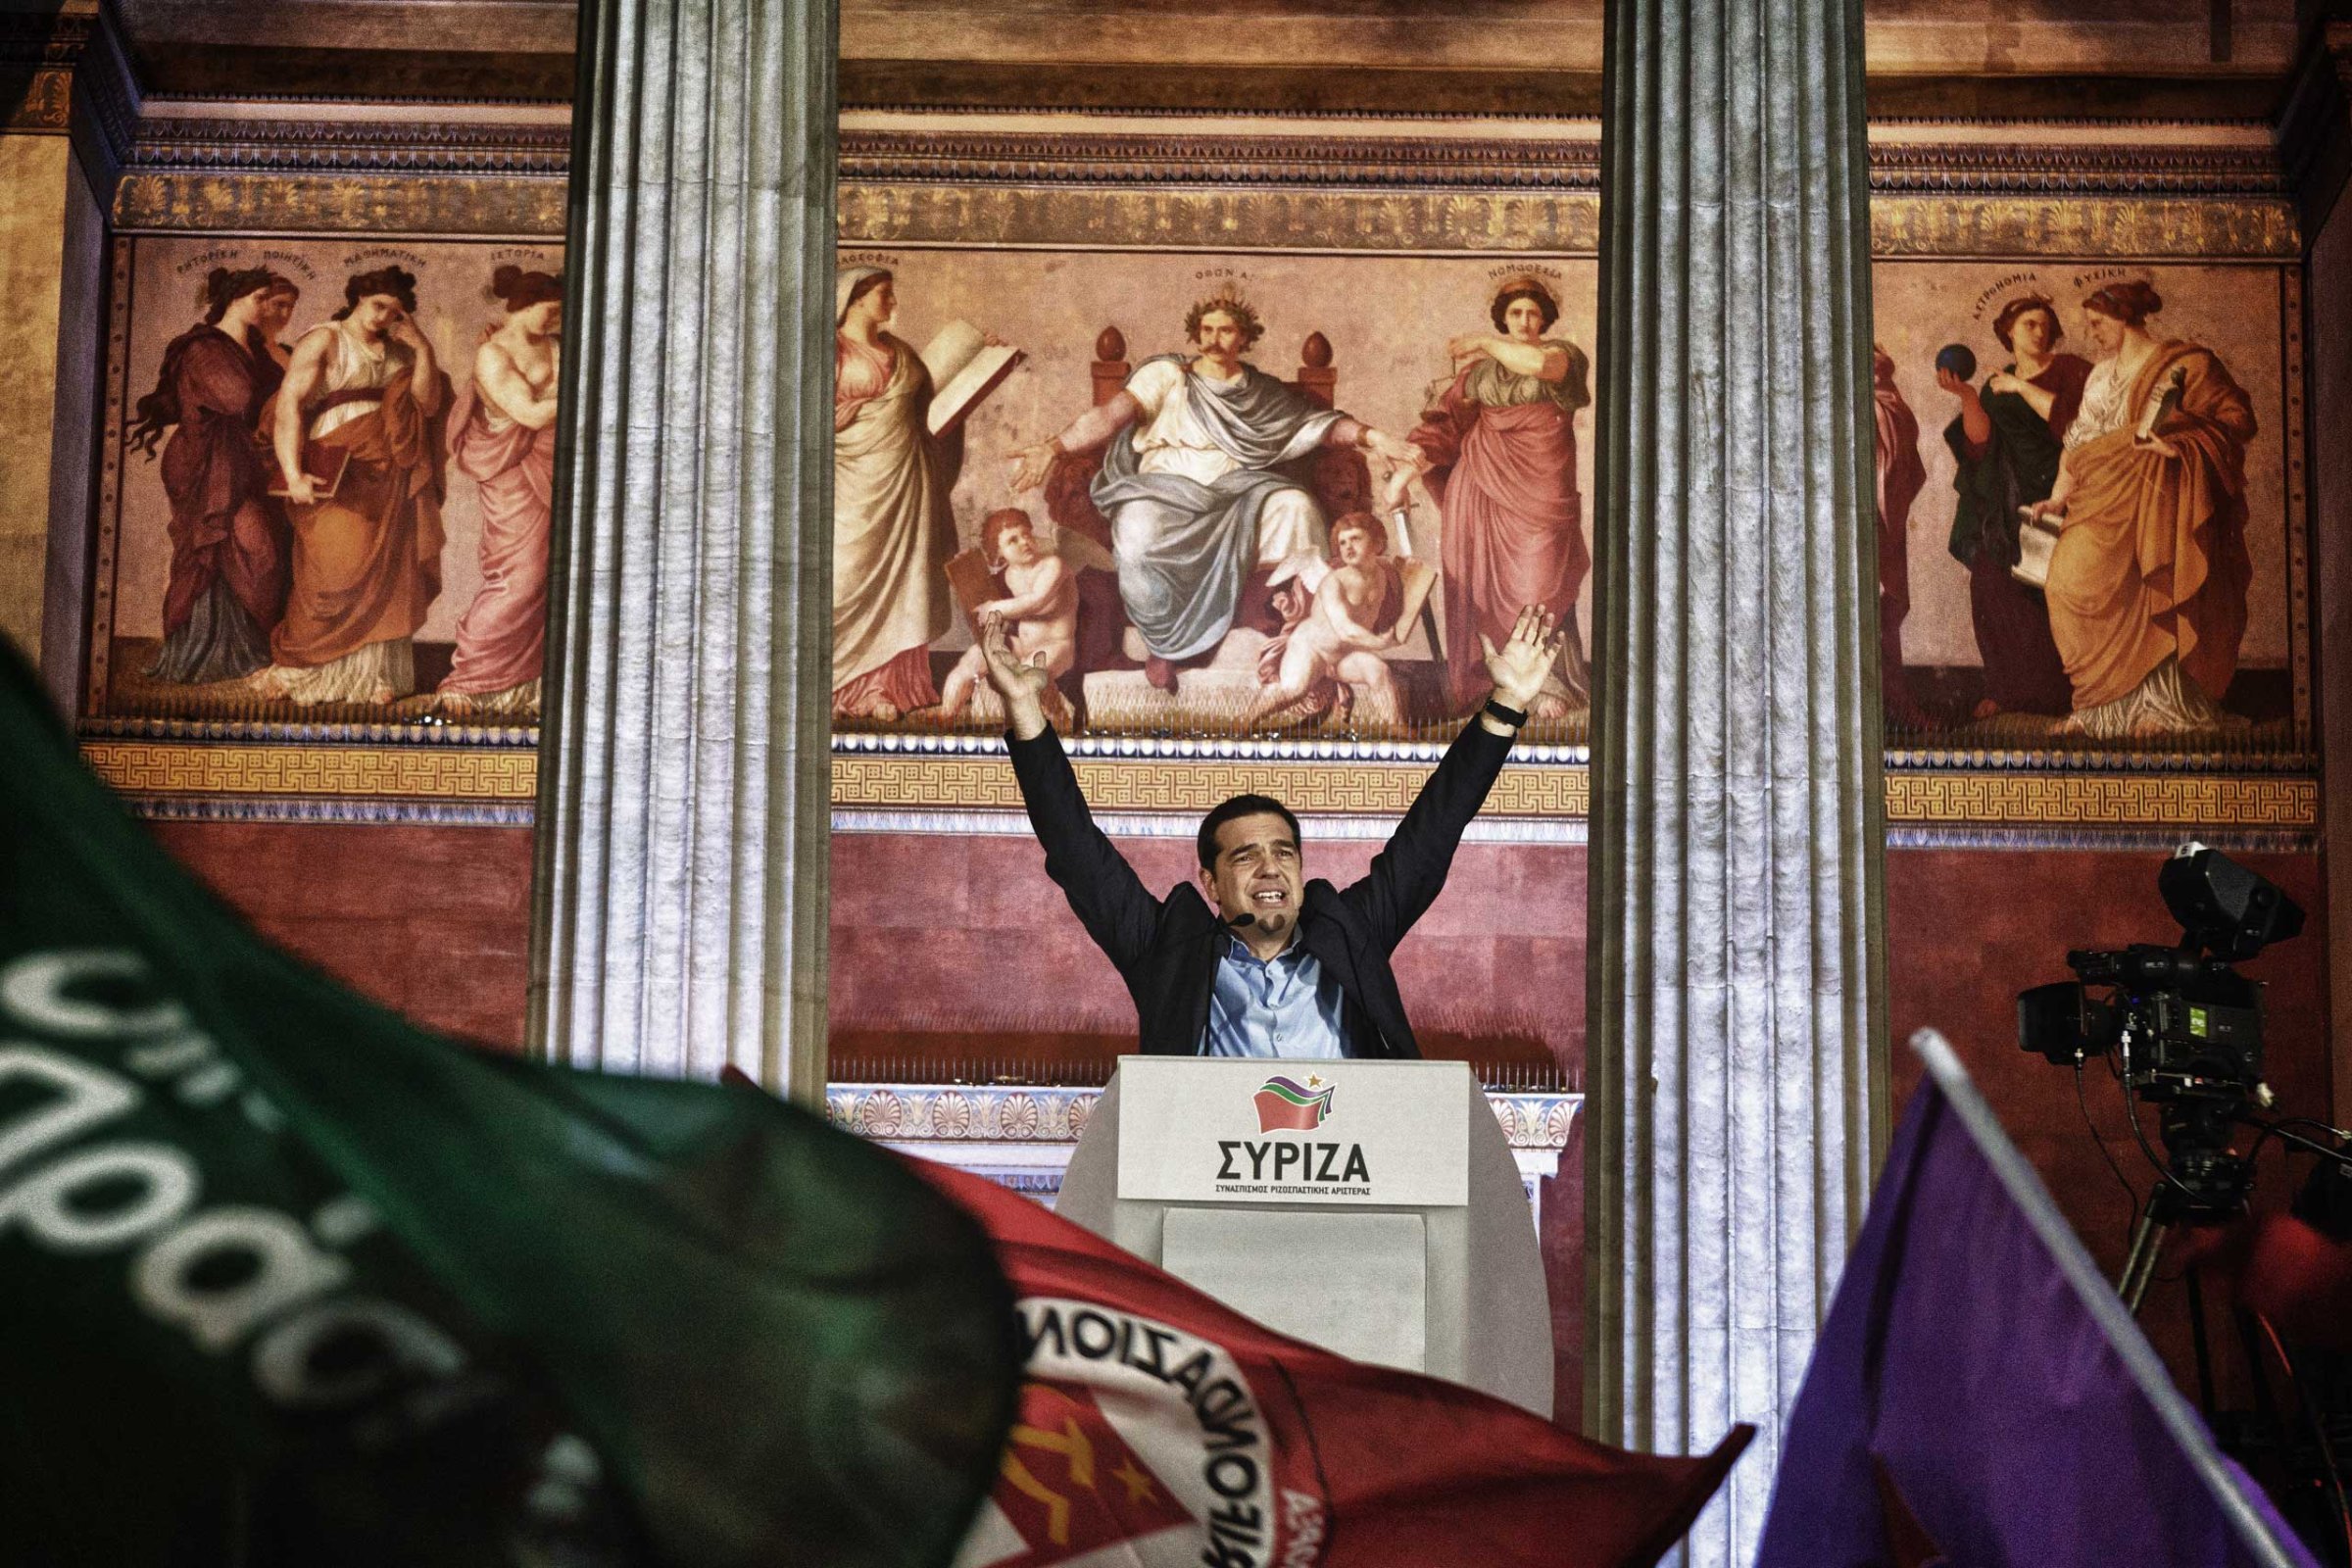 Leader of Syriza party Alexis Tsipras, during his victory speech in Athens, Jan. 25, 2015.